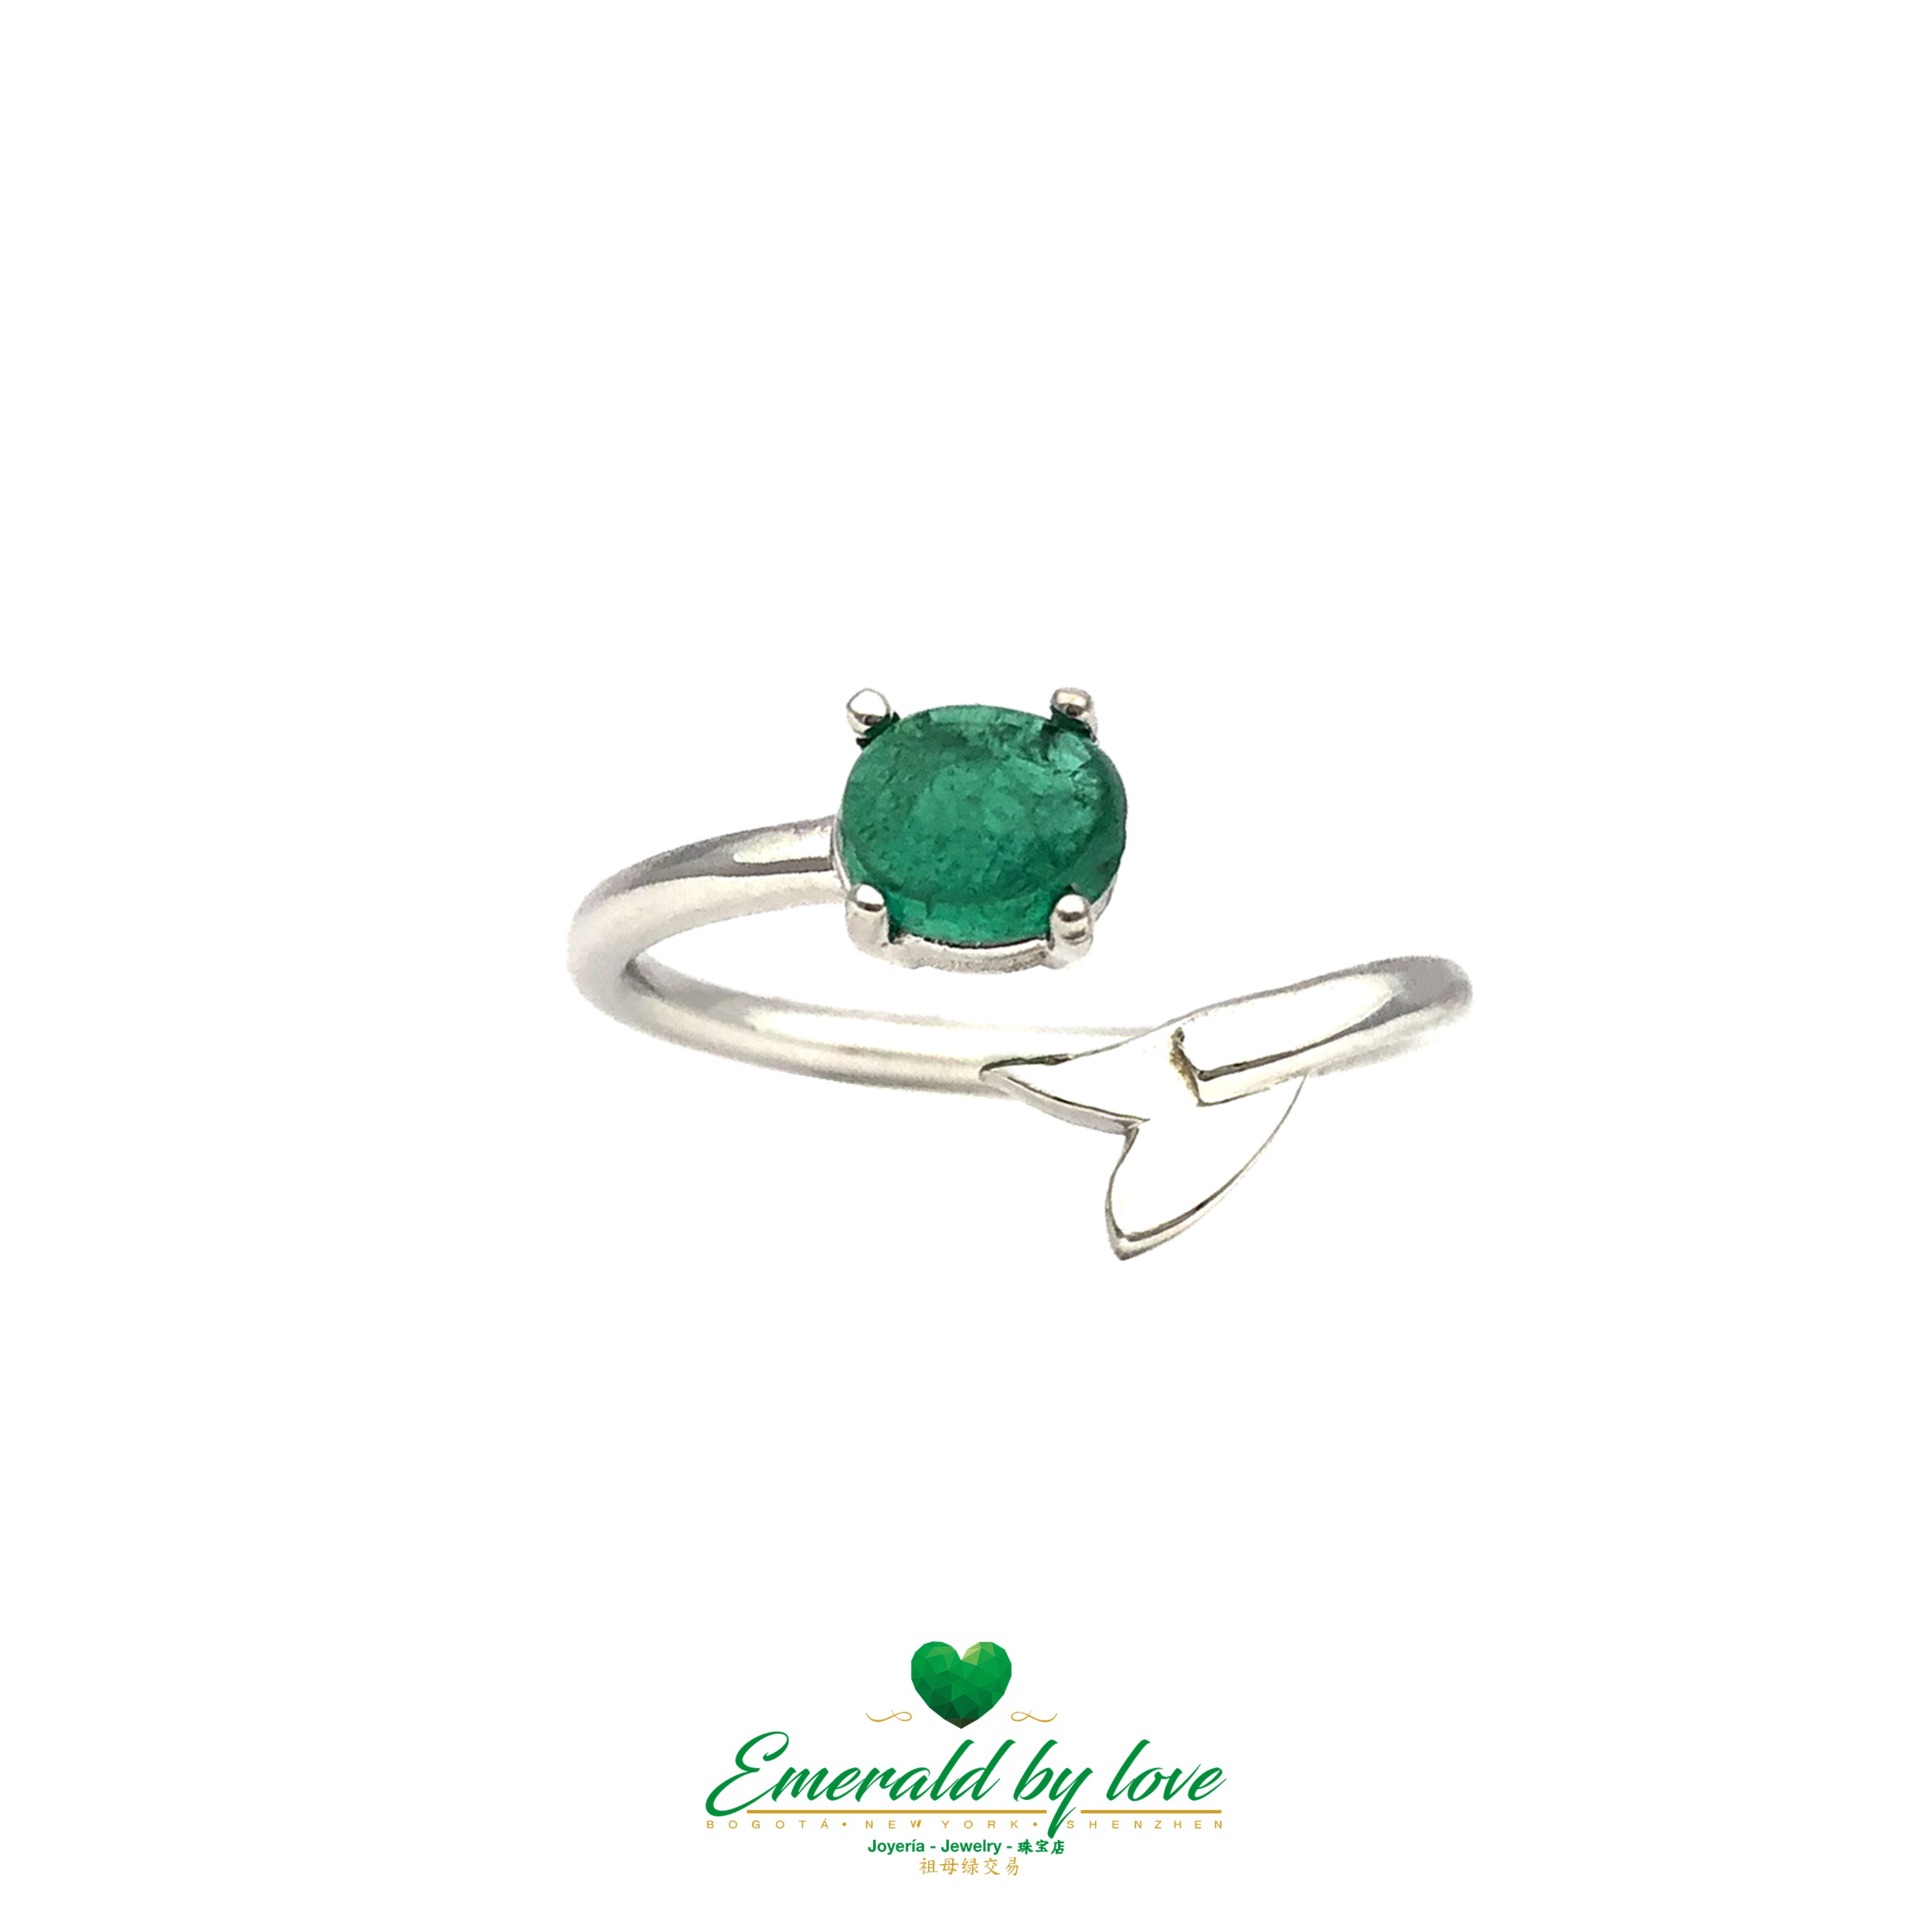 Mermaid Round-Shaped Colombian Emerald in 18k White Gold